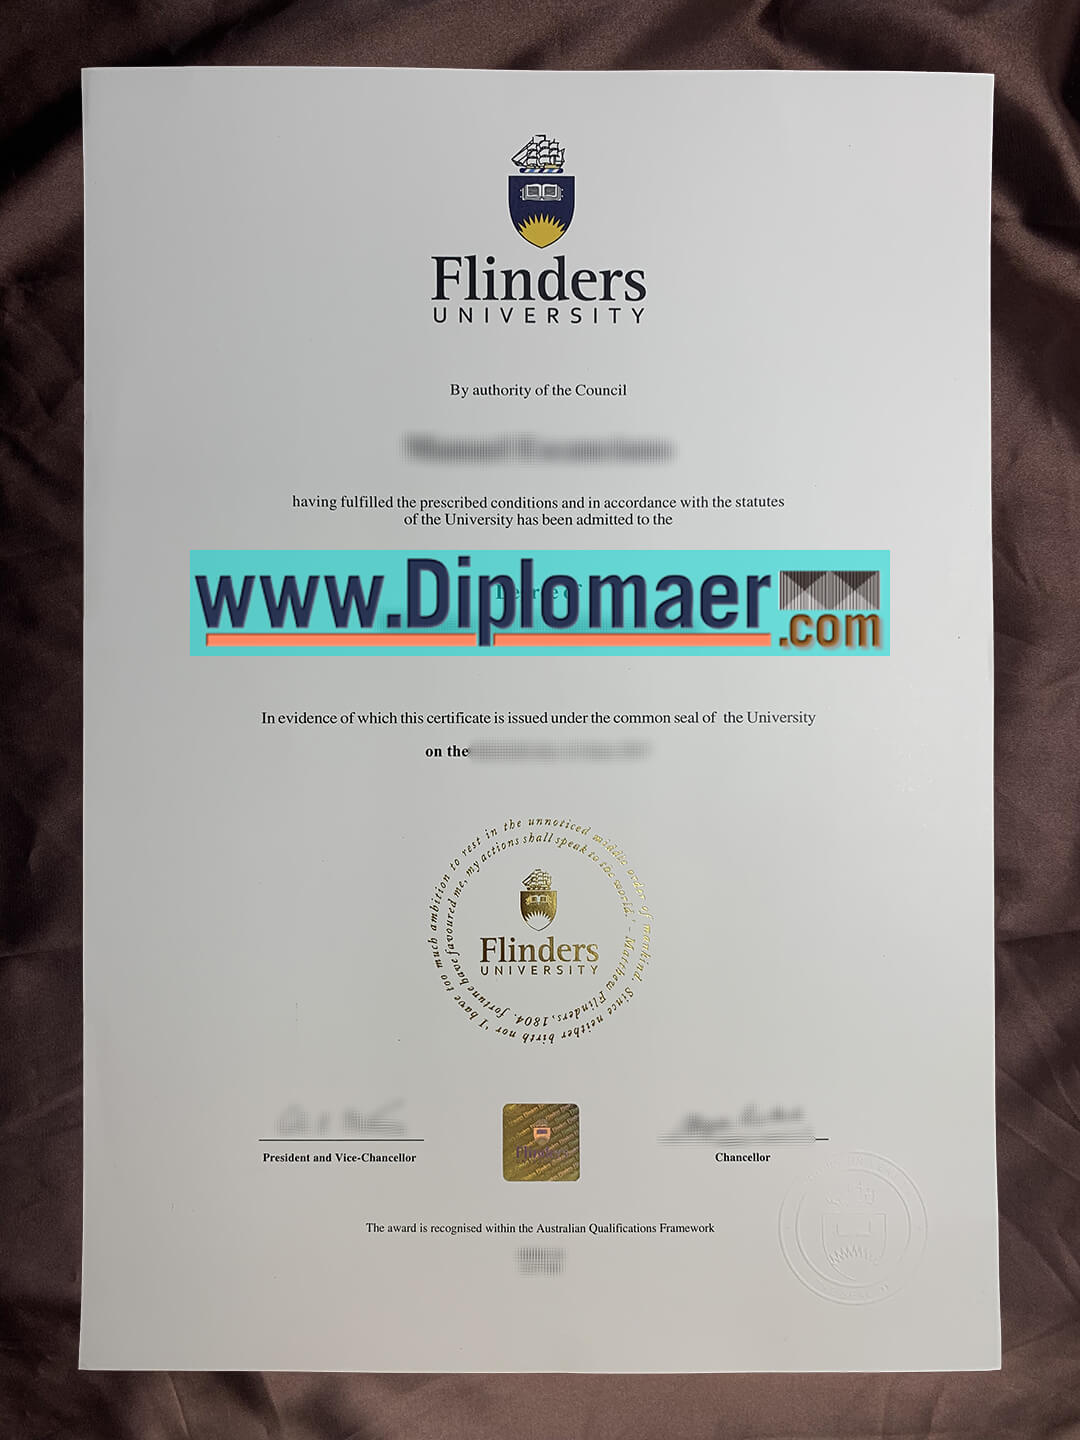 Flinders University fake diploma - Which site sell Flinders University fake diplomas?